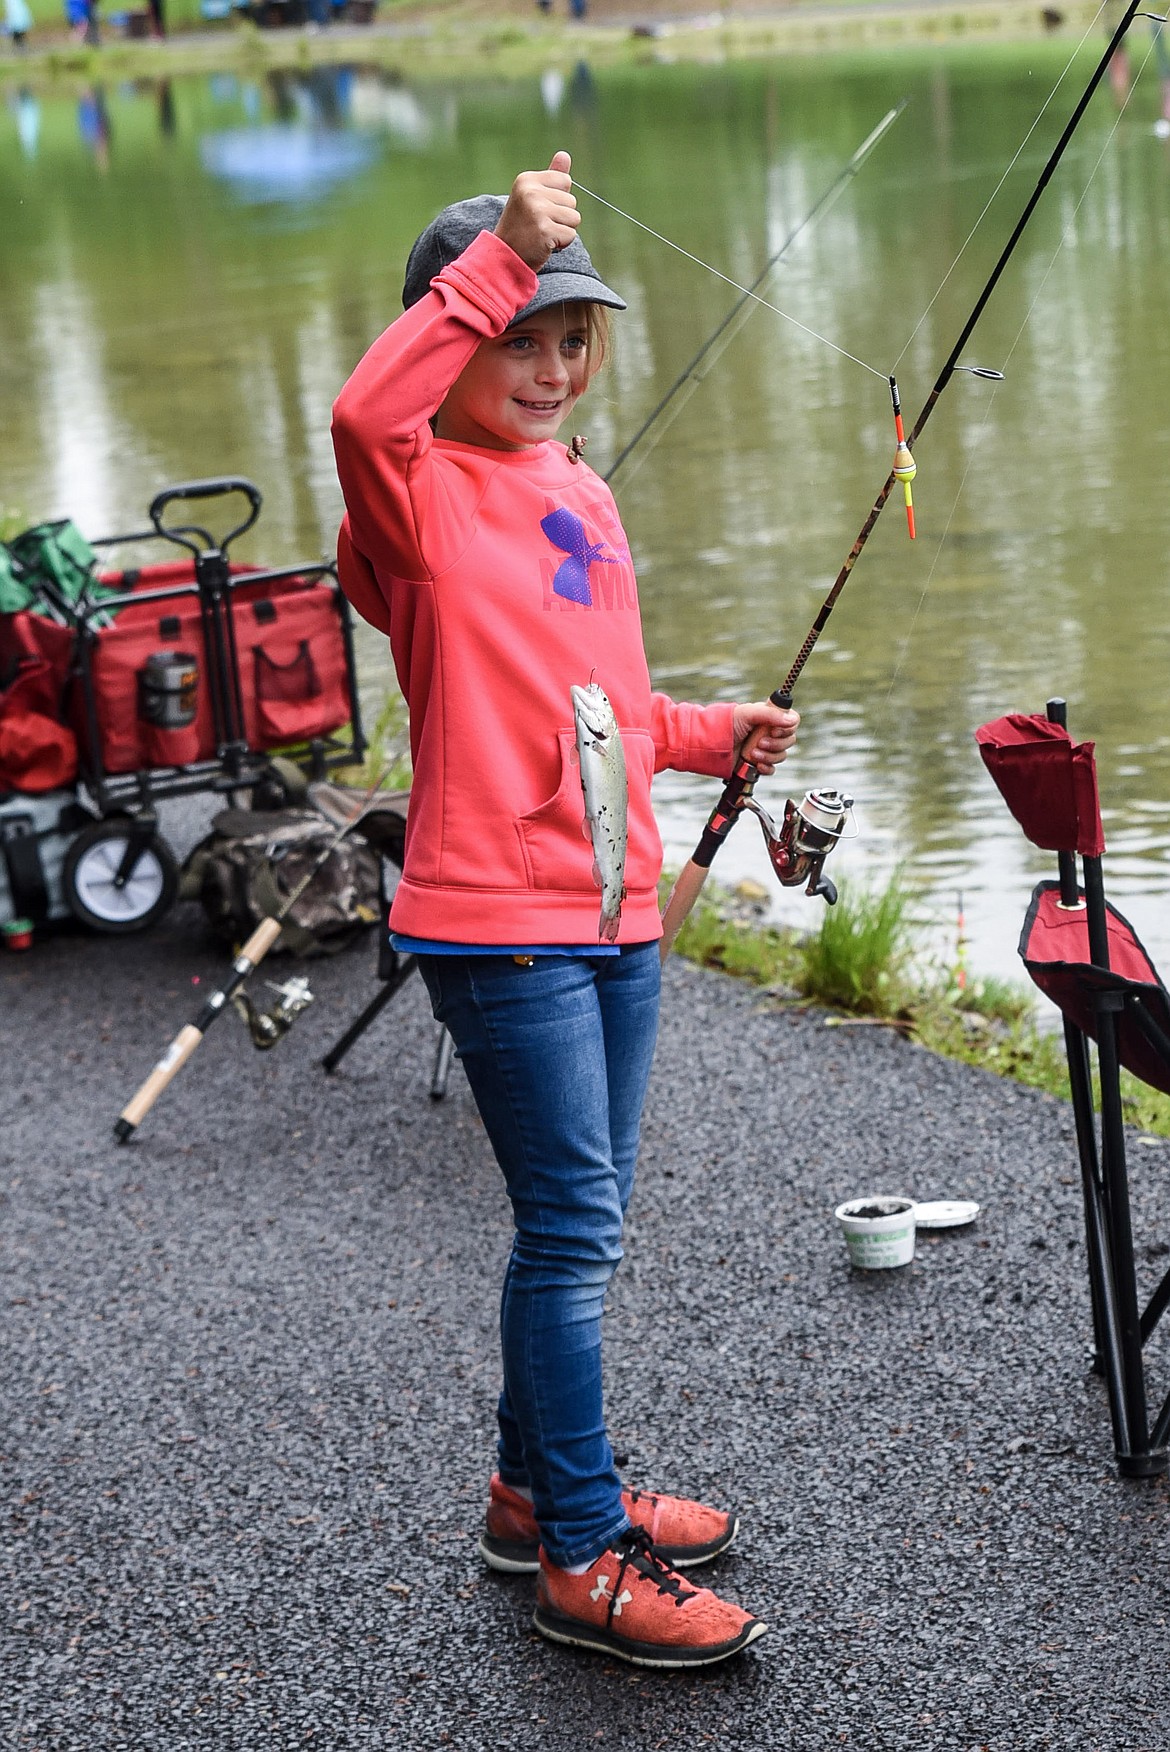 Teighler Parker holds up her catch at the Lil&#146; Anglers Fishing Day at the Mill Pond on Saturday (Ben Kibbey/The Western News)